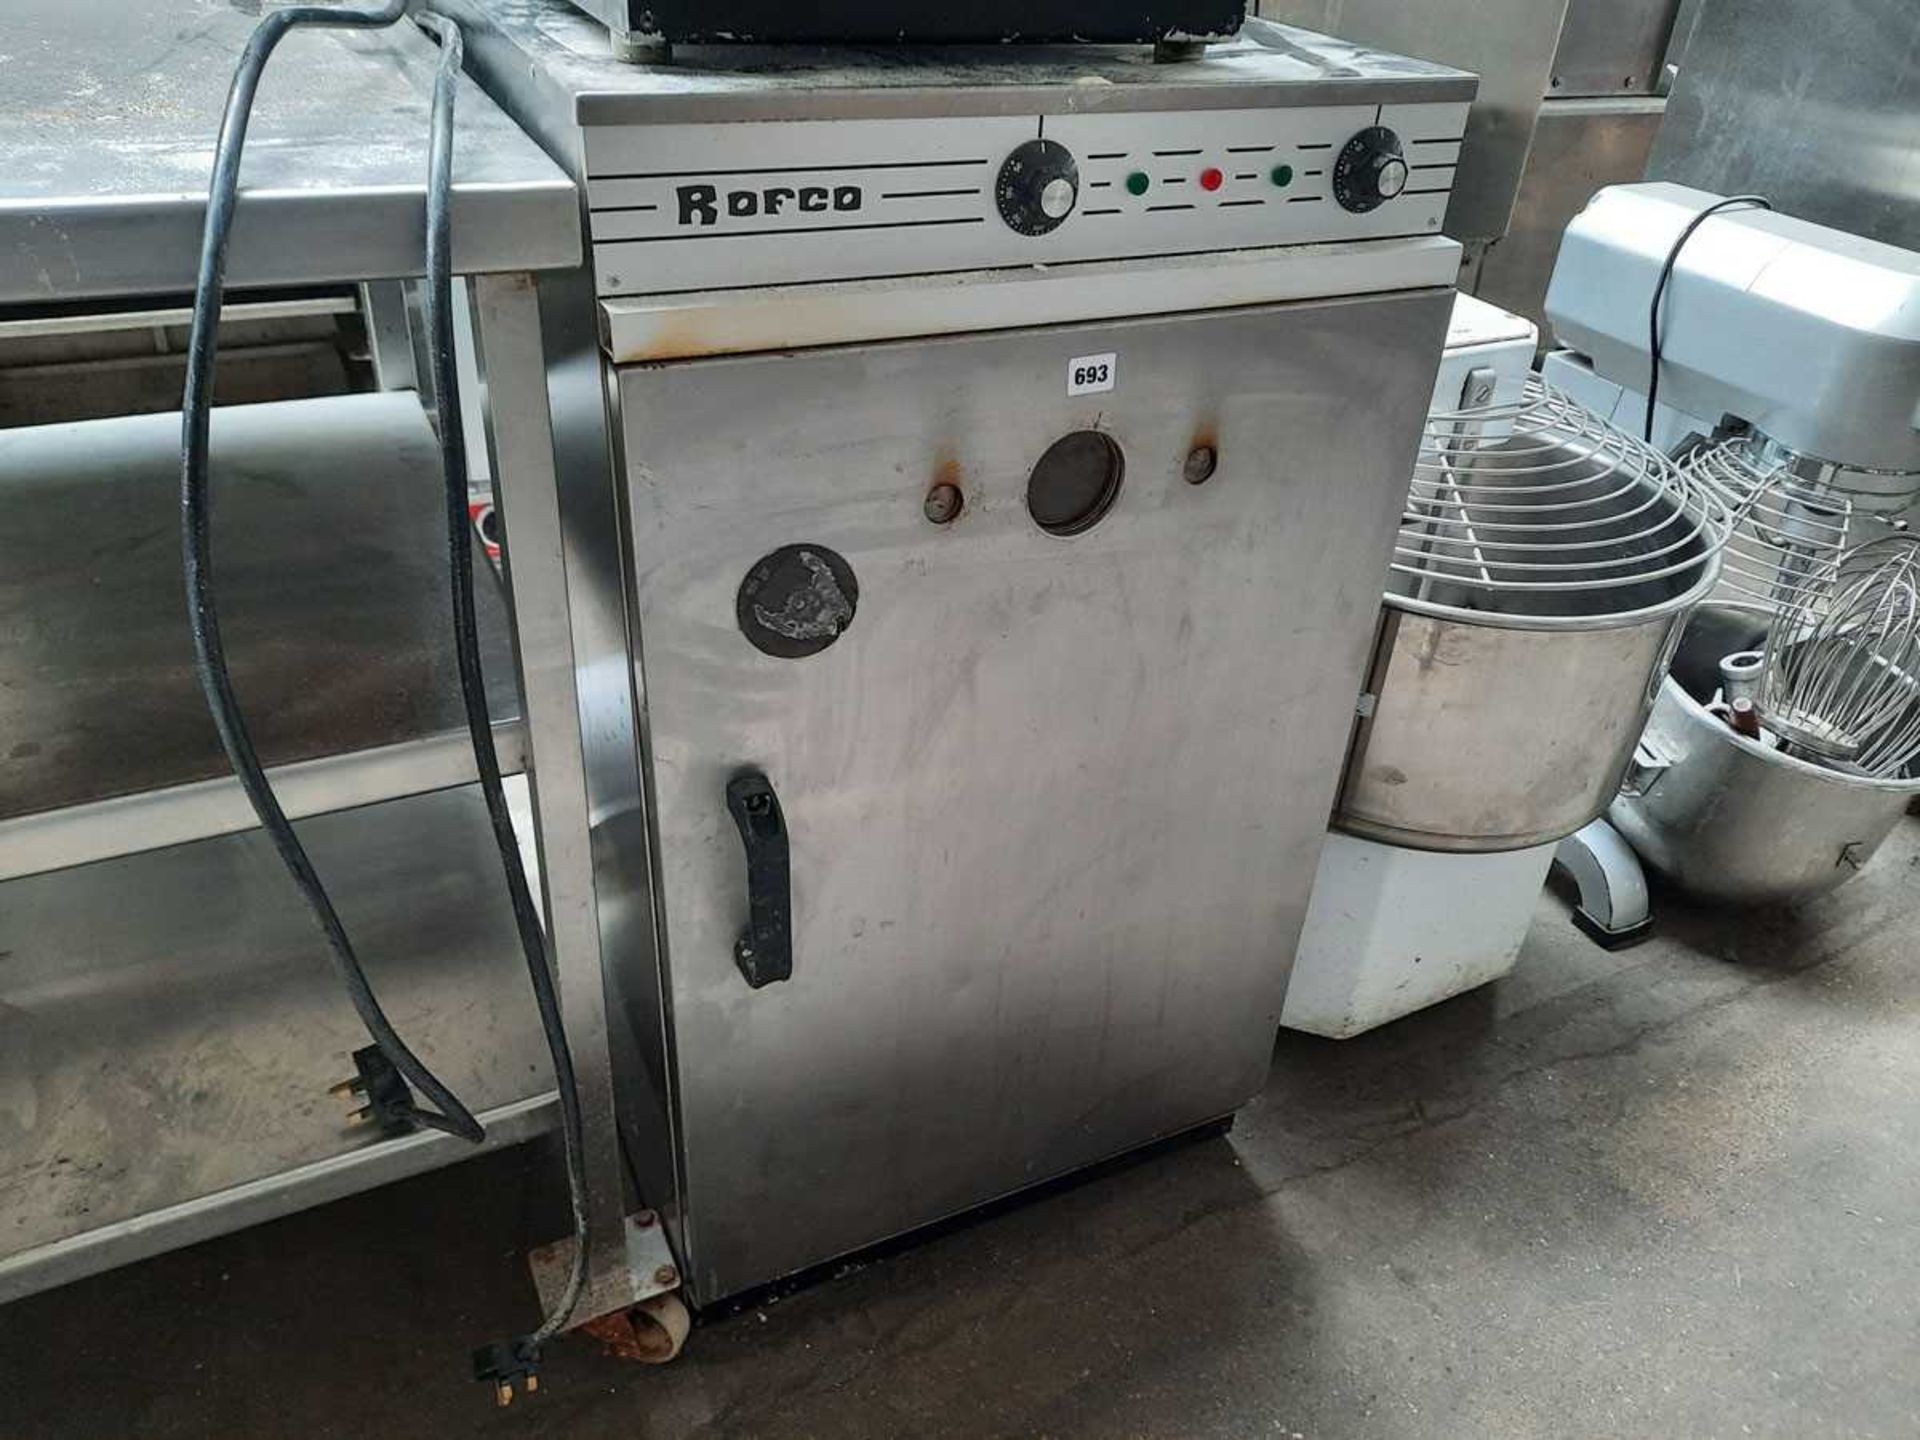 55cm Rofco bakers oven with stones